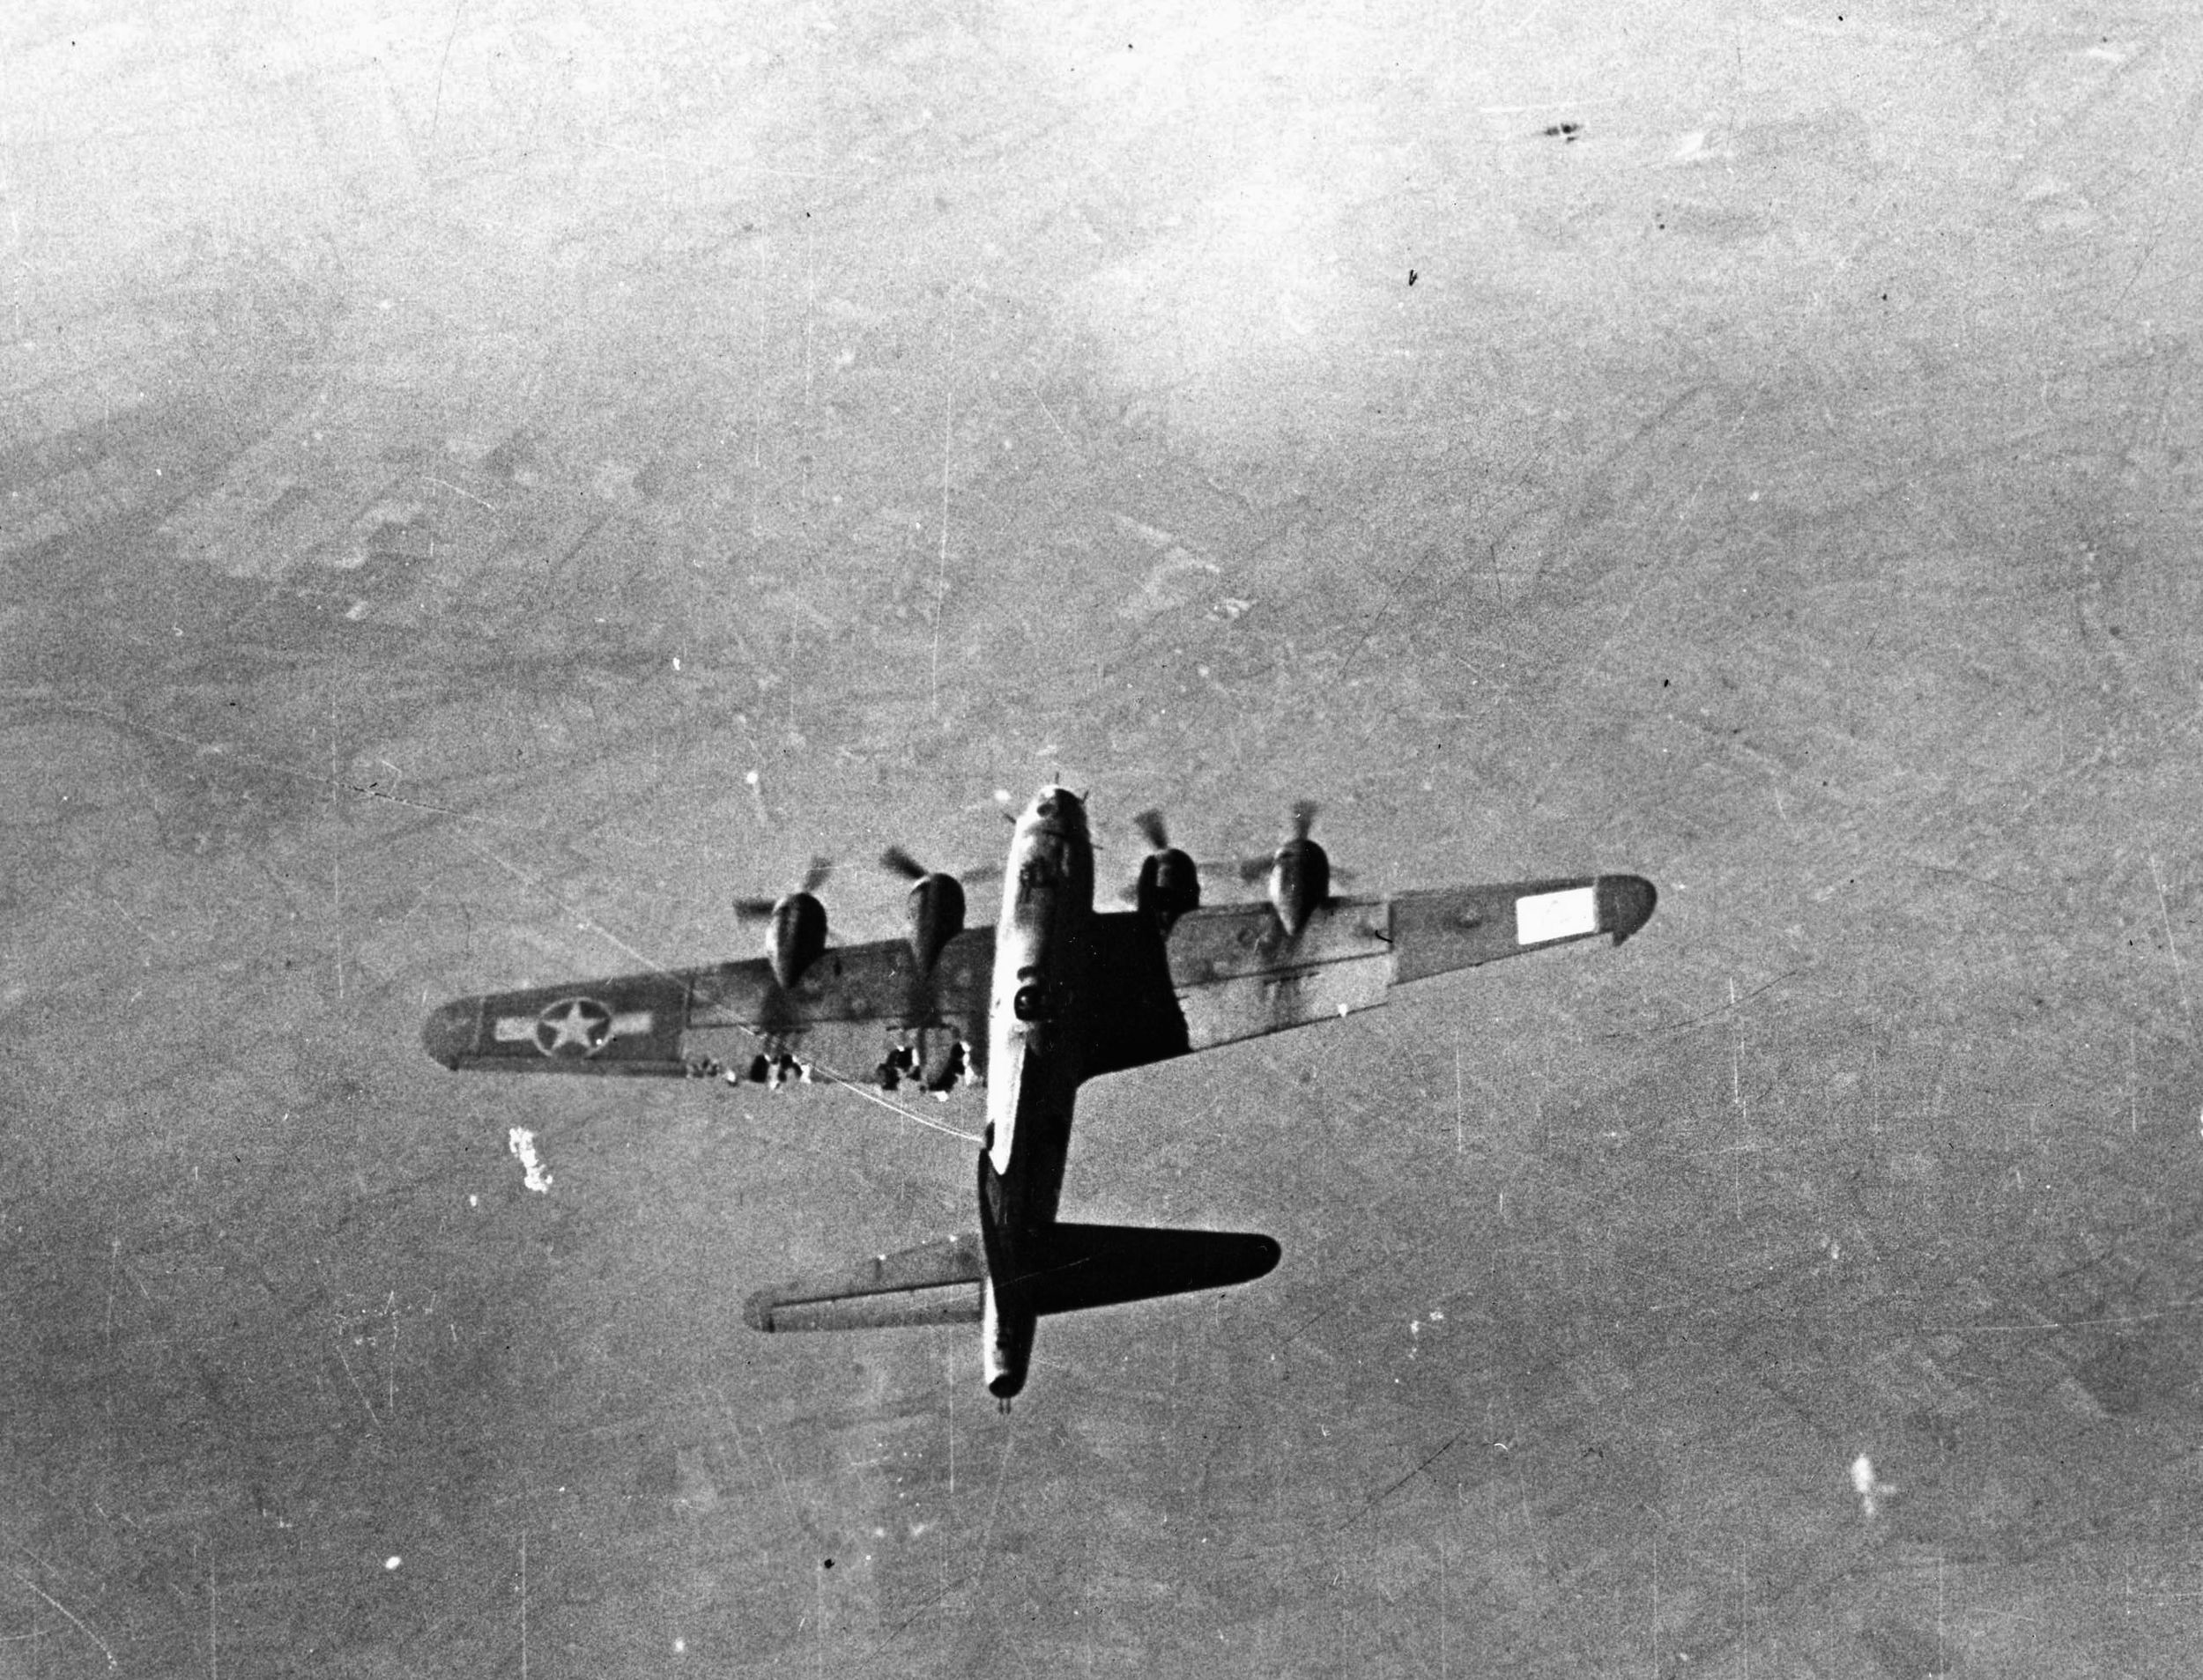 Having sustained visible damage to its left wing either from thick German flak or marauding Luftwaffe fighters, this B-17 bomber nevertheless maintains formation during the bombing run on a mission against the communications center of Gelsenkirchen, Germany. (National Archives)